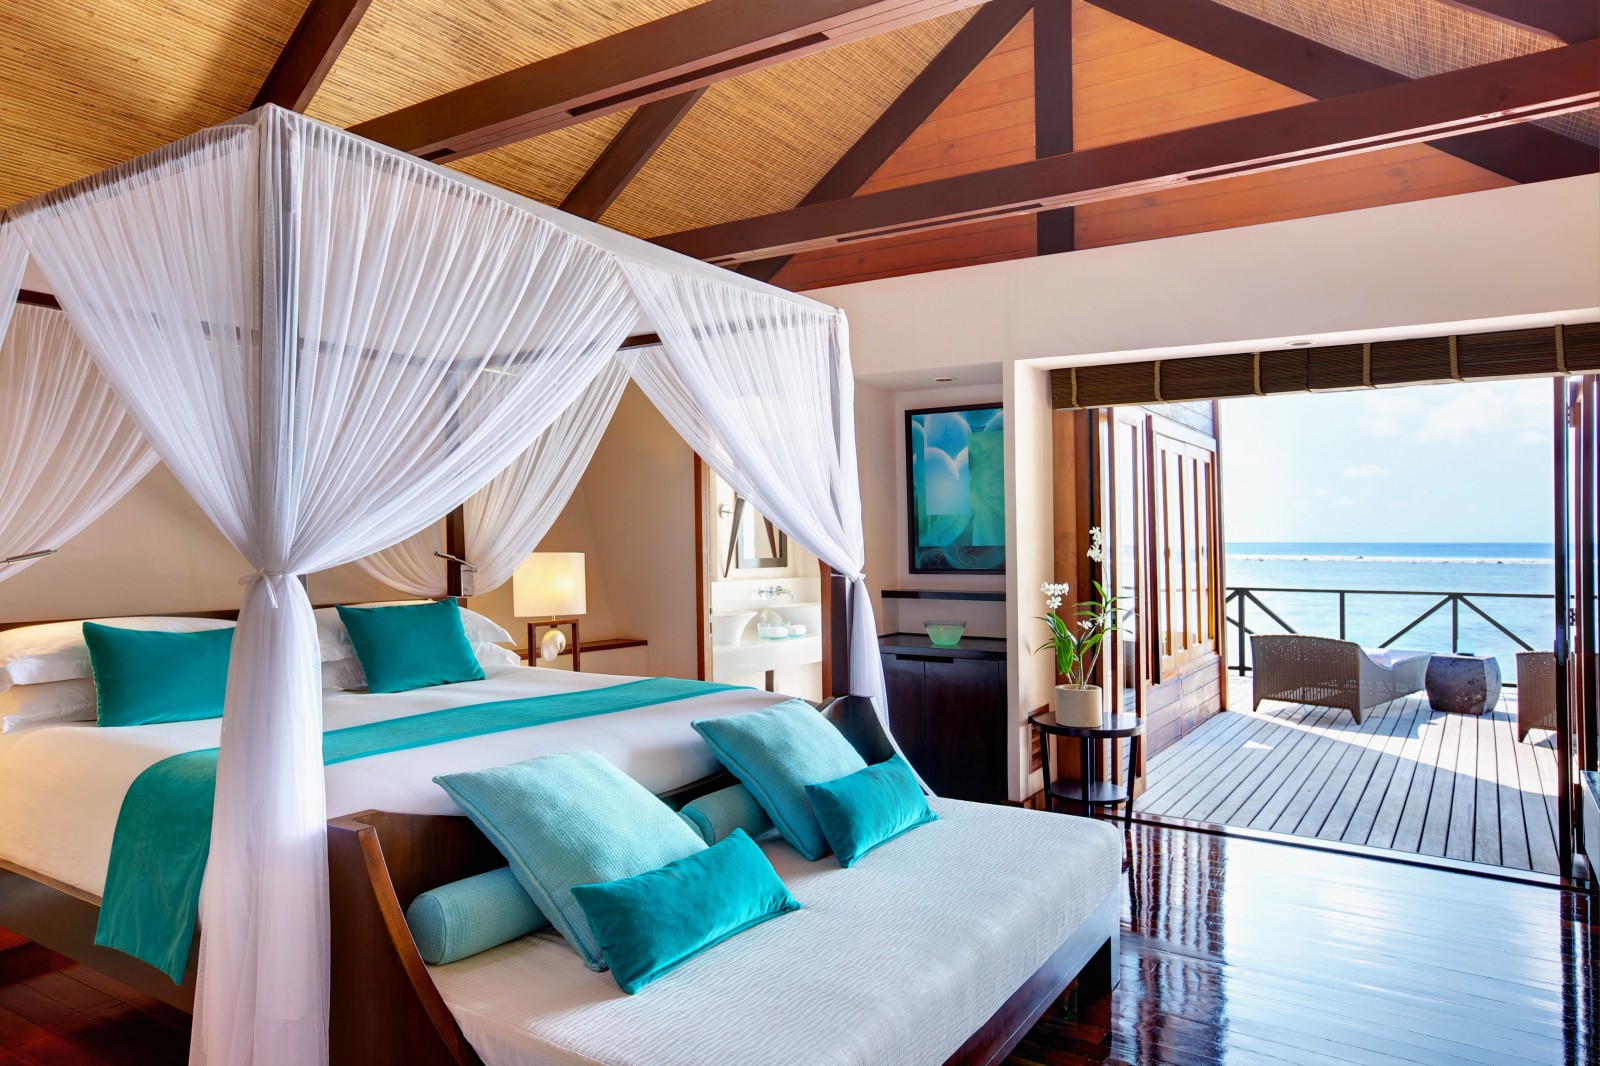 Double bedroom of a Water Villa at LUX Maldives